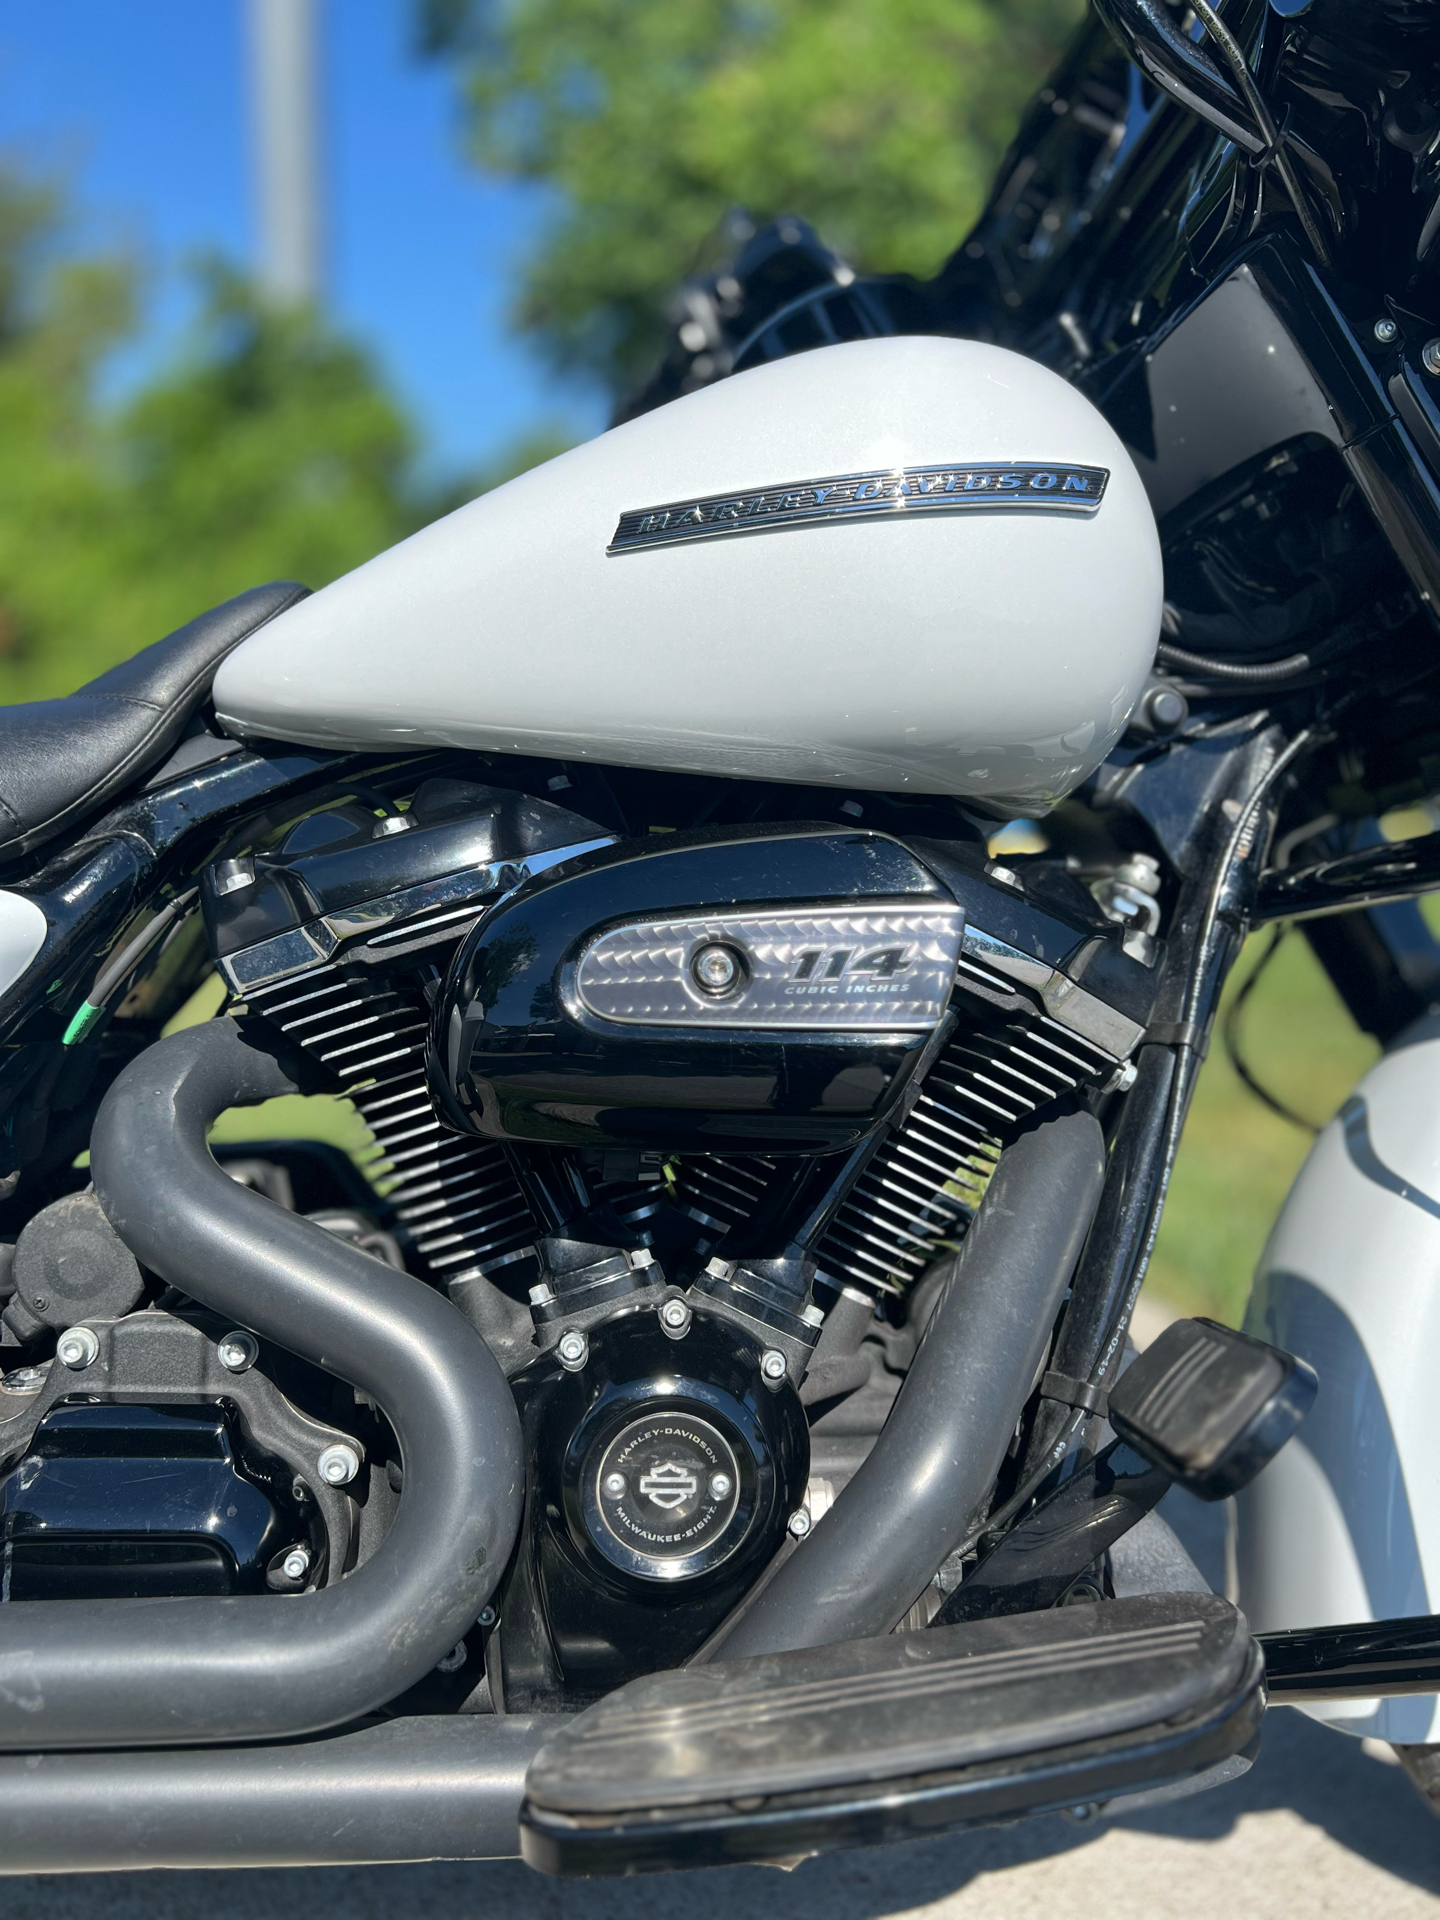 2020 Harley-Davidson Street Glide® Special in Franklin, Tennessee - Photo 2